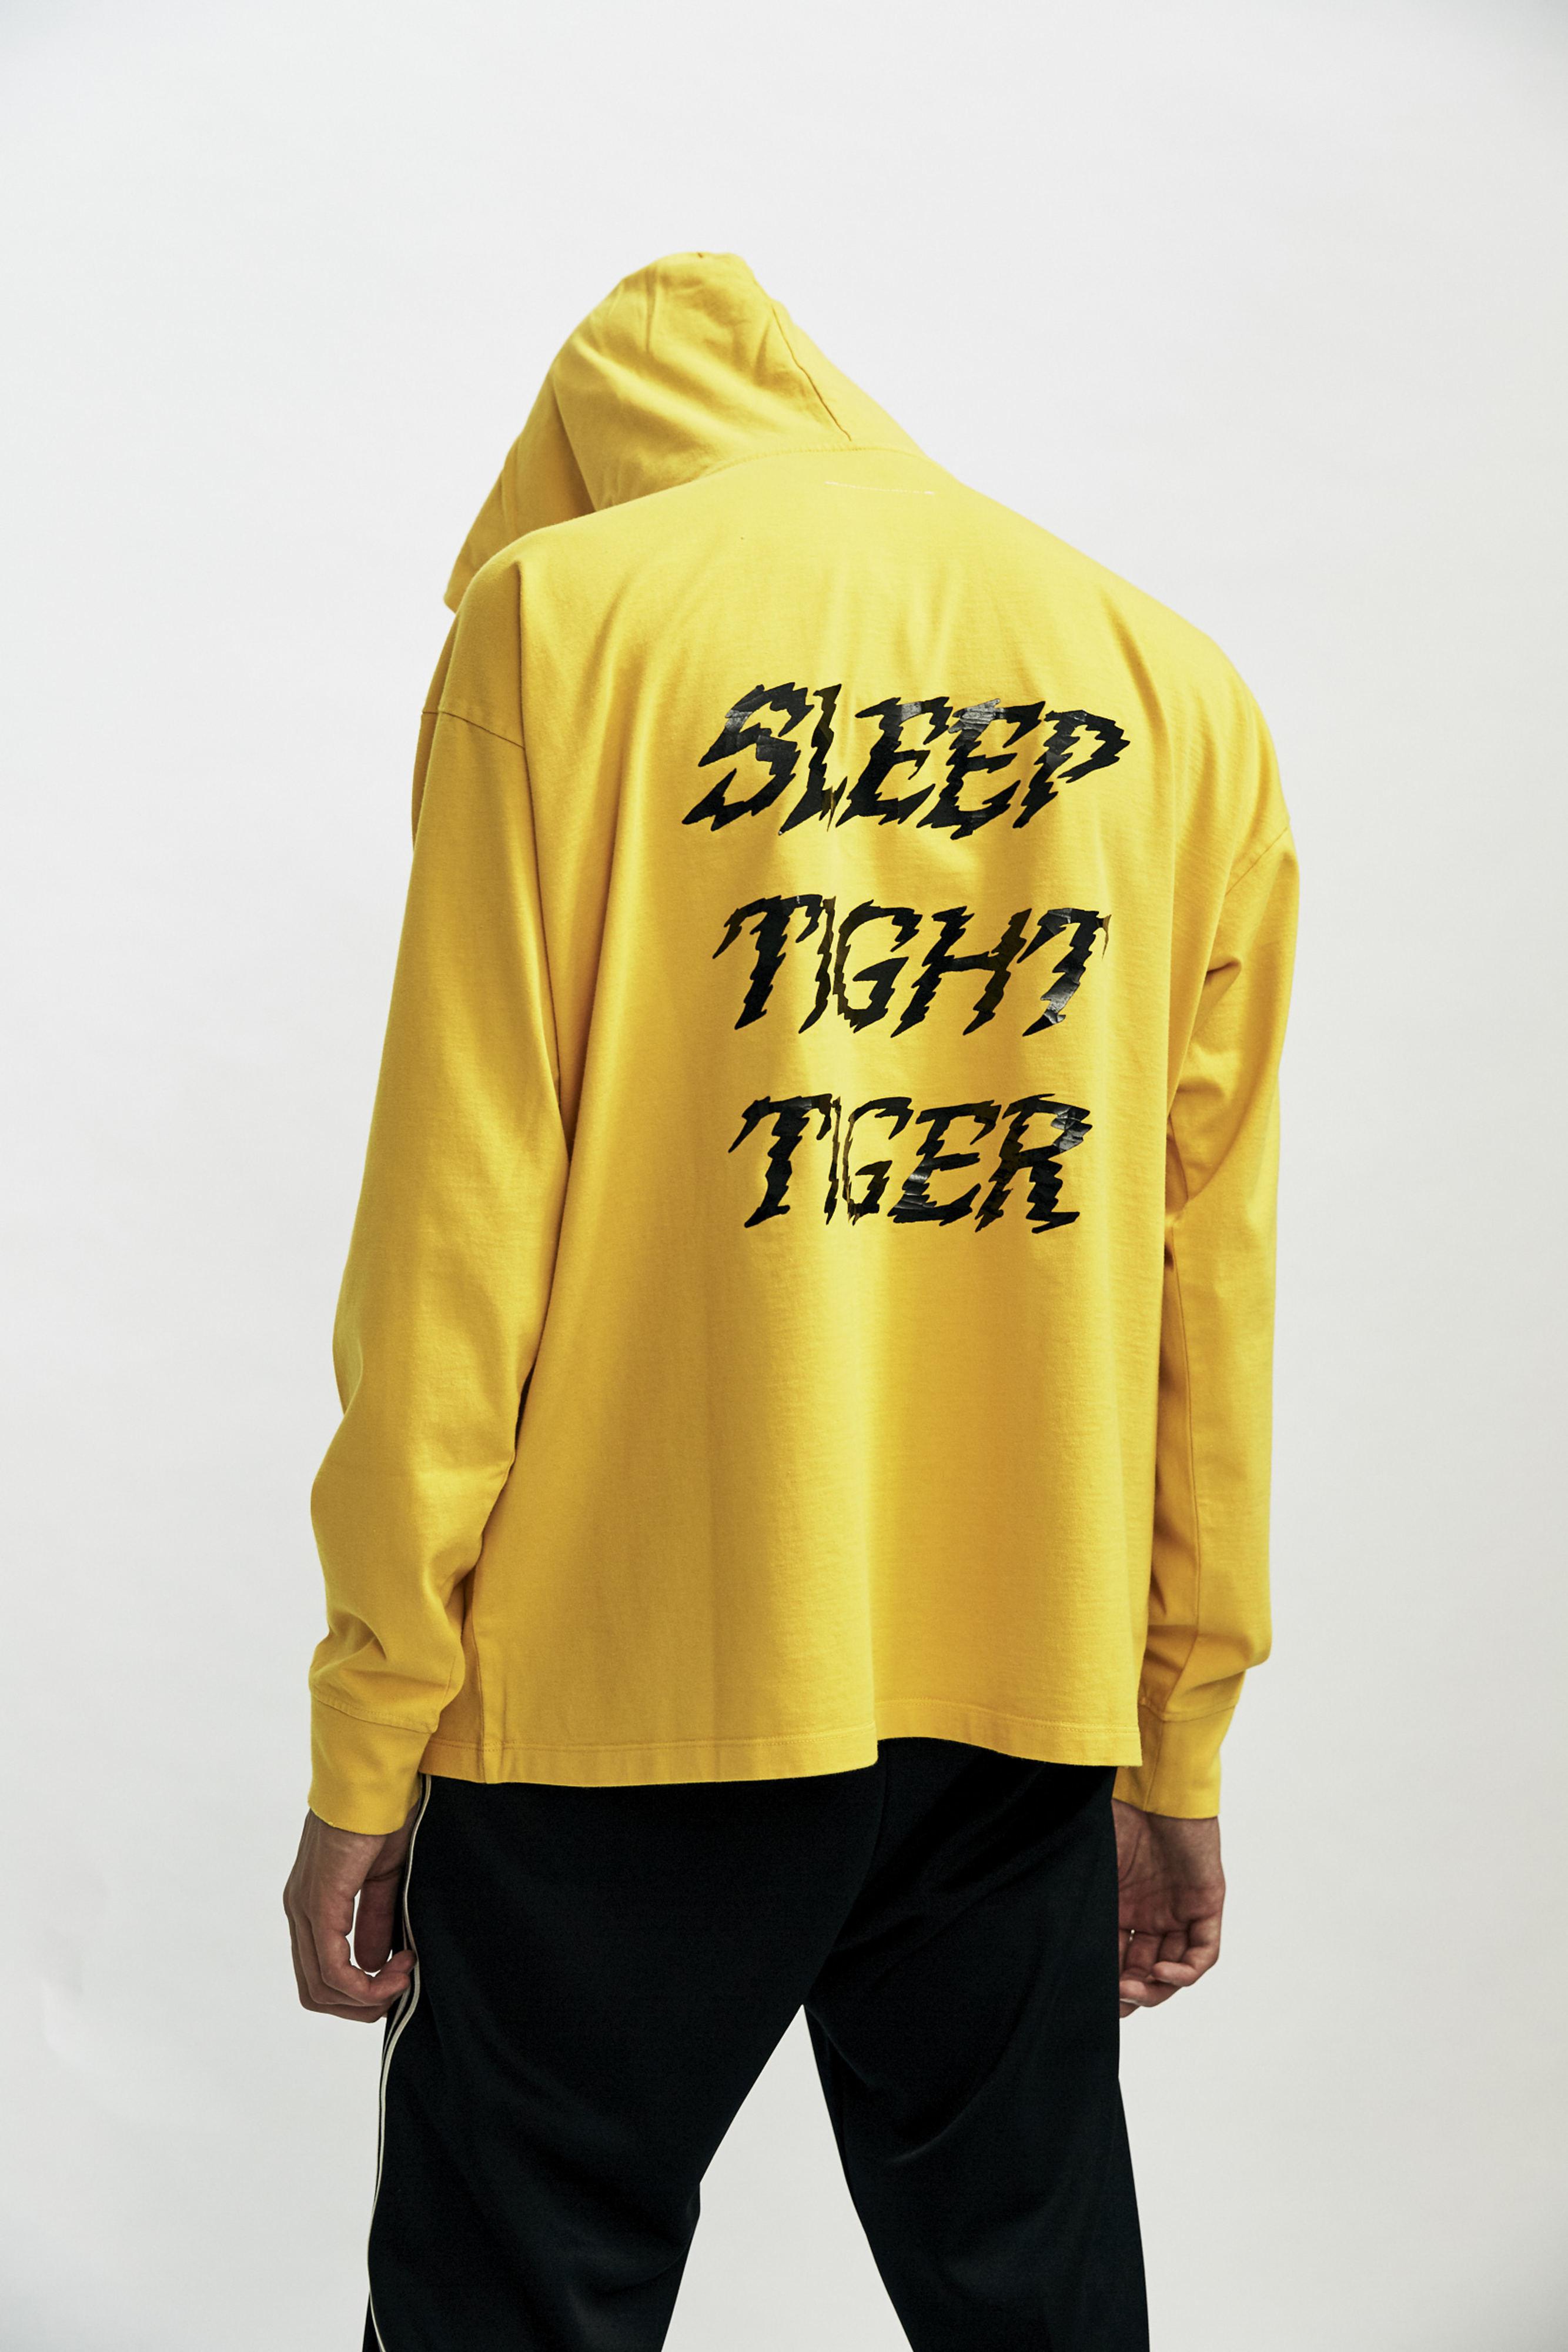 Lyst - MM6 by Maison Martin Margiela Yellow Hooded T-shirt in Yellow ...